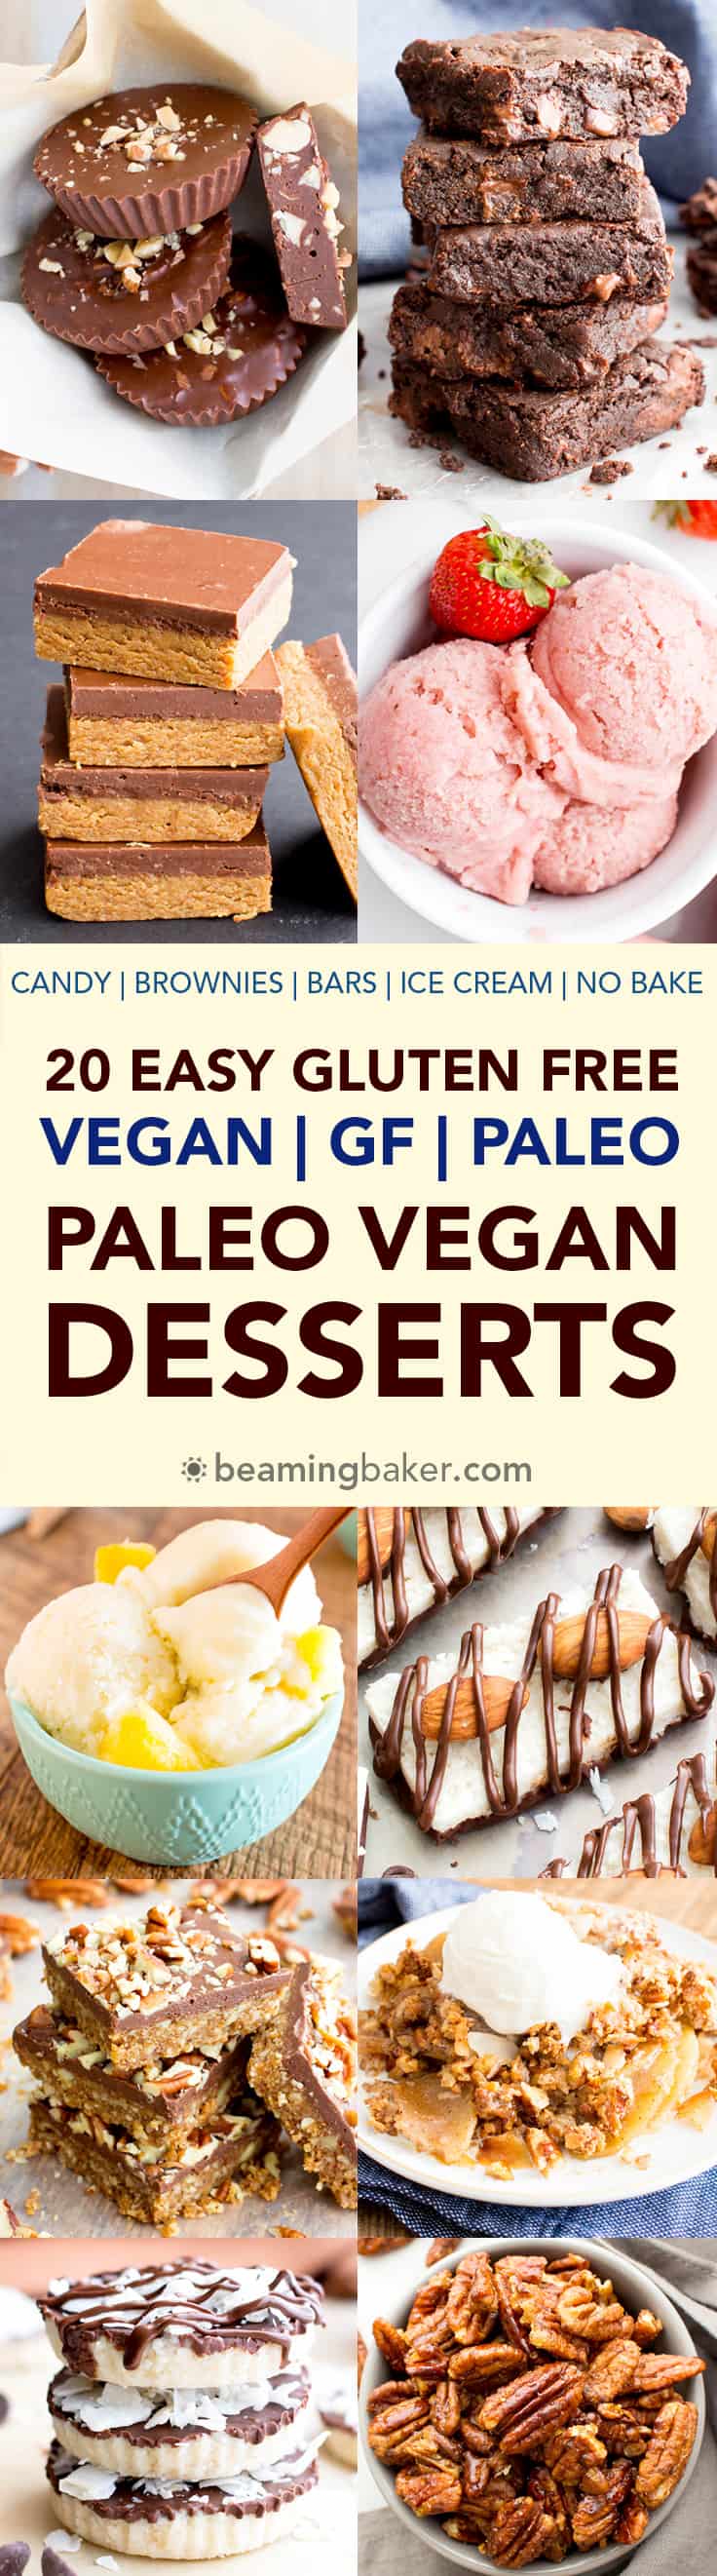 Top 20 Paleo Vegan Dessert Recipes of 2017 (V, GF): A mouthwatering collection of the best paleo desserts to satisfy your sweet tooth! #Vegan #GlutenFree #DairyFree #Paleo #Dessert | BeamingBaker.com